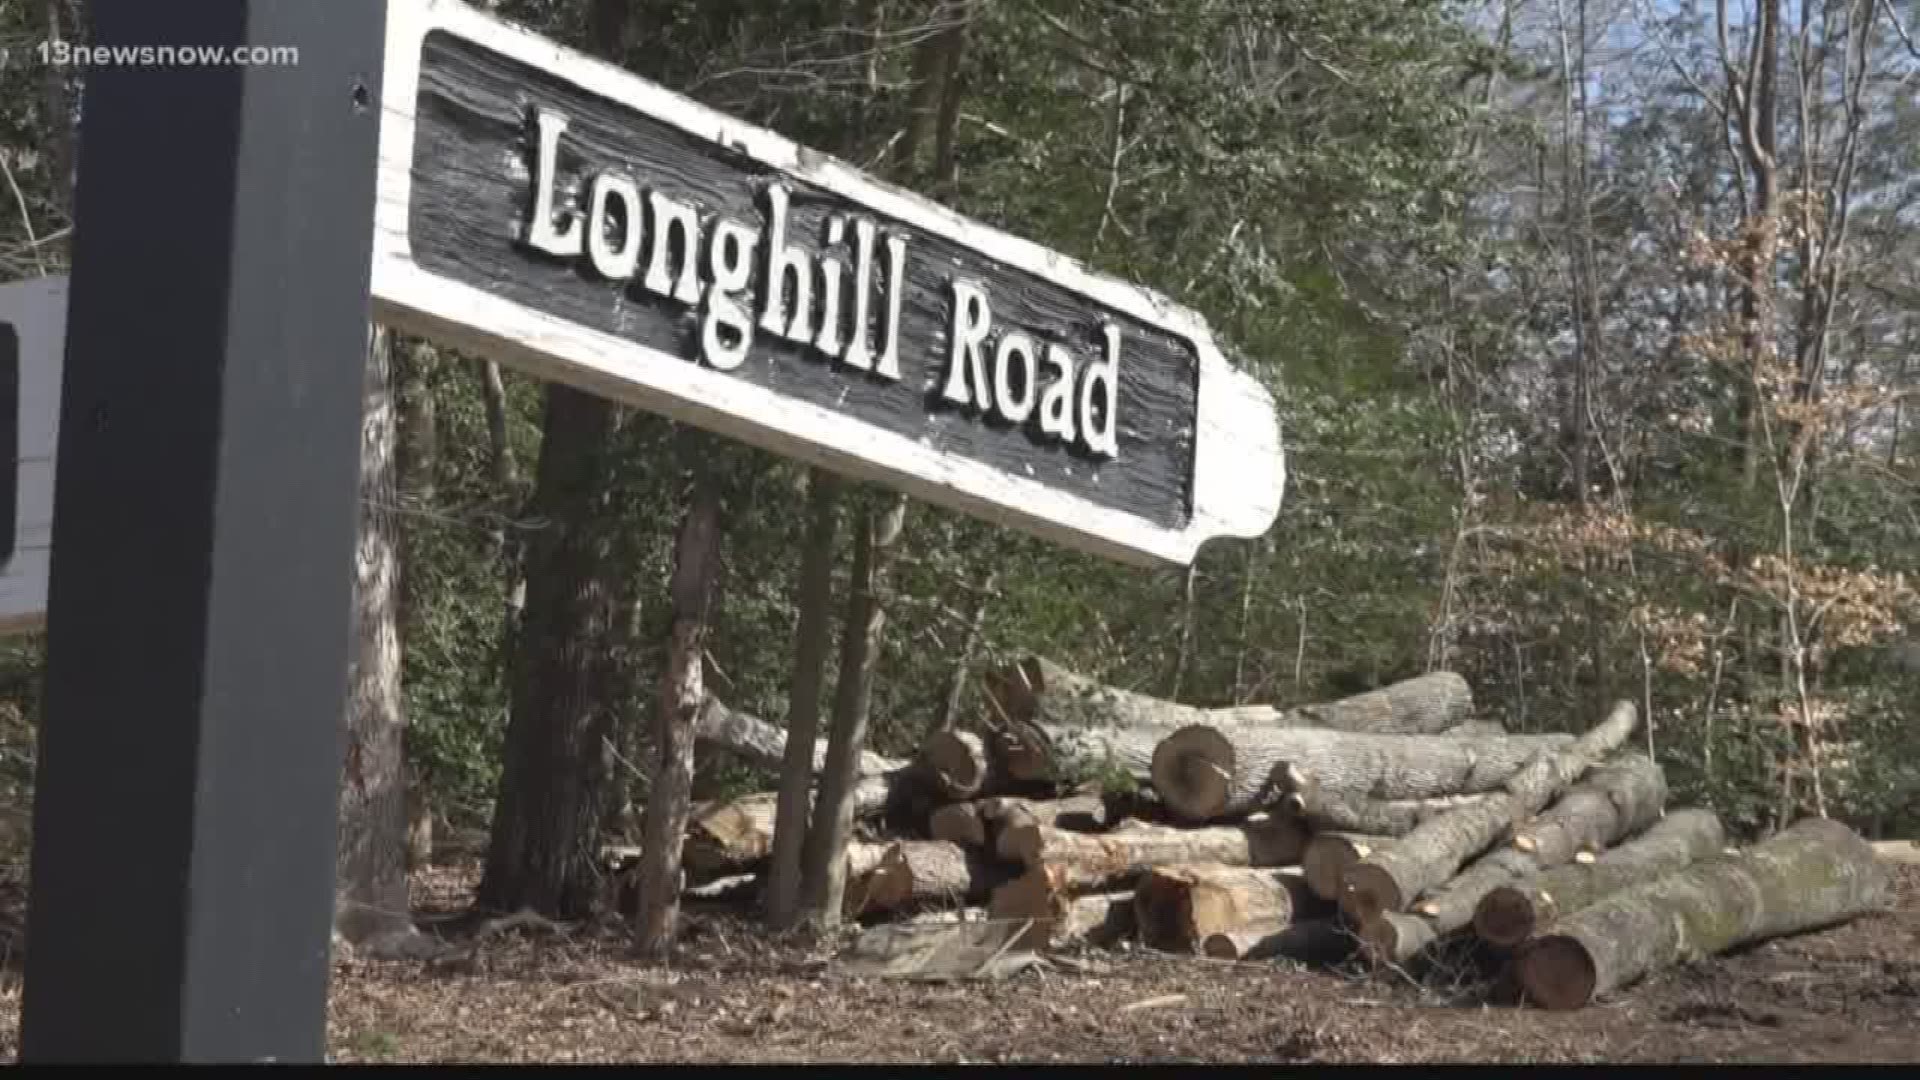 James City County residents are upset that VDOT is removing trees along Longhill Road in order to widen the road.